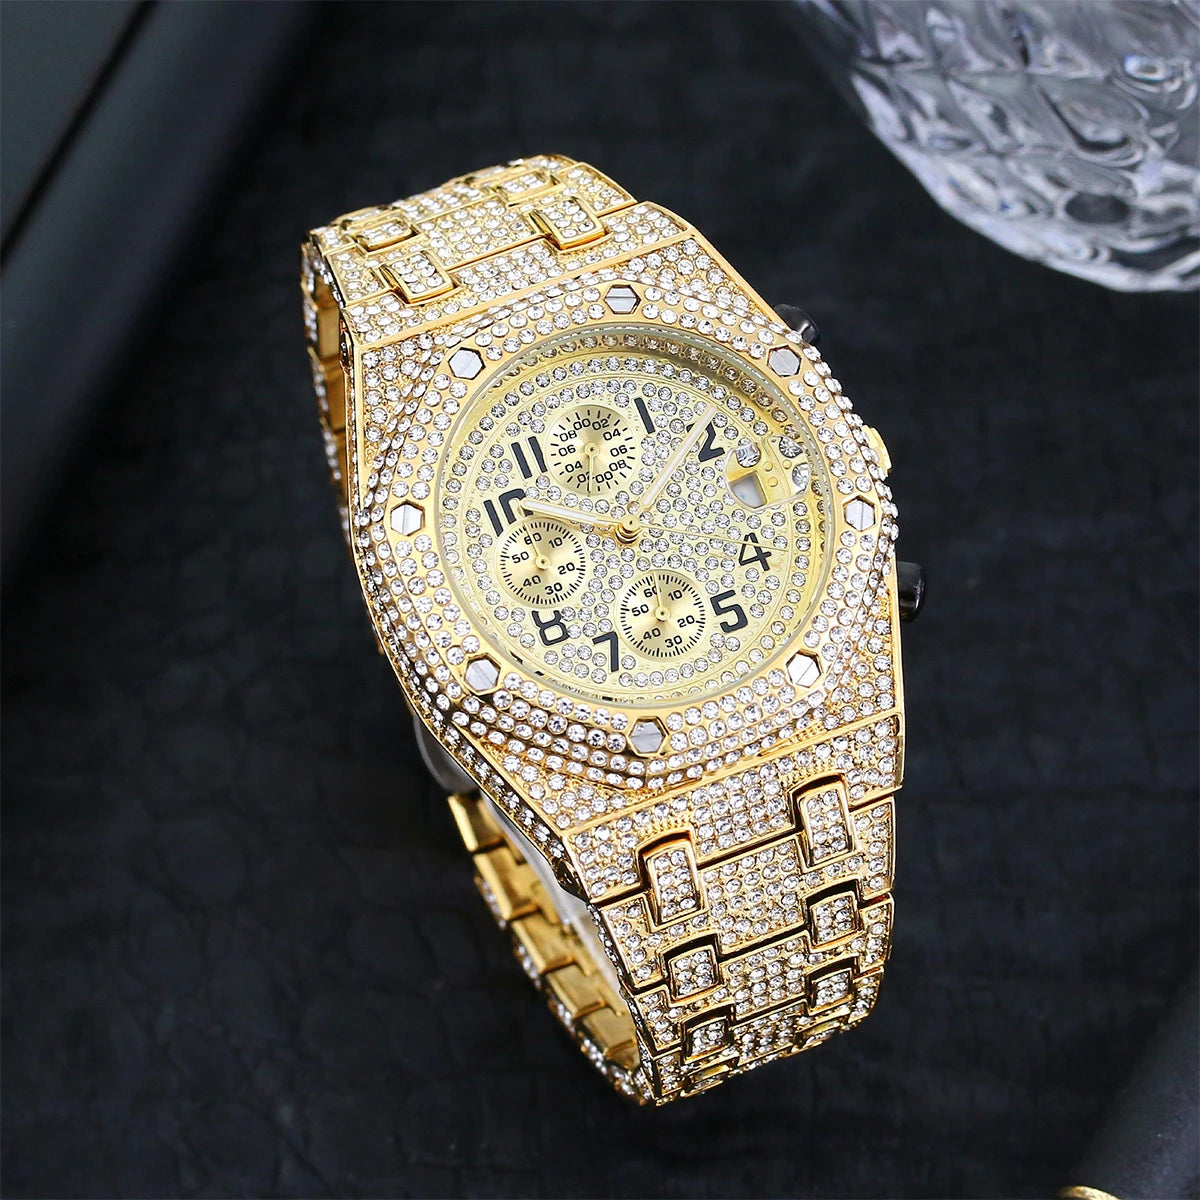 LUXURY BUST DOWN ARABIC NUMERALS ICED OUT DIAMOND WATCH - GOLD/WHITE GOLD